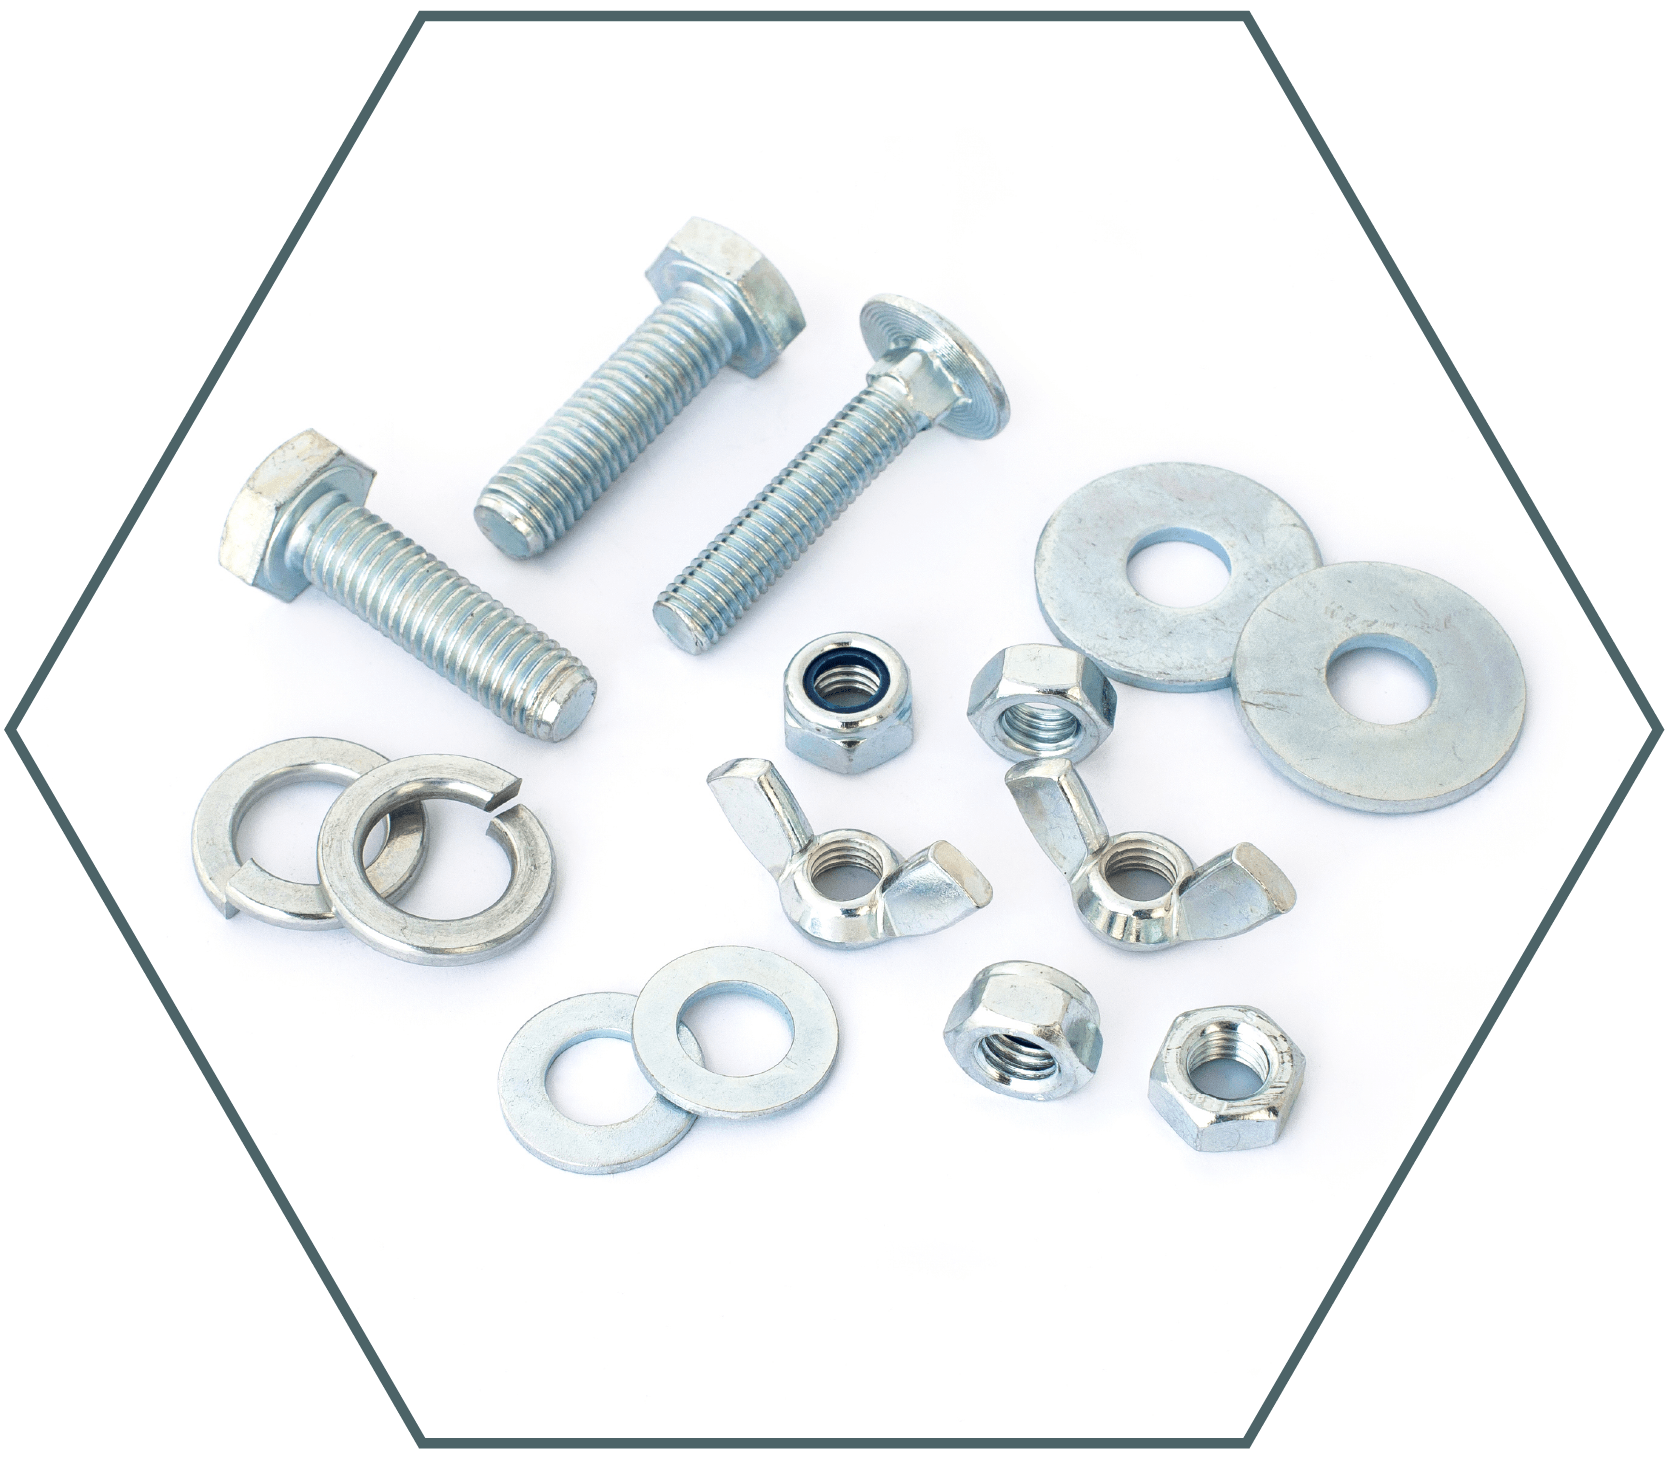 Fasteners specialists - Bolts Nuts Washers Rods